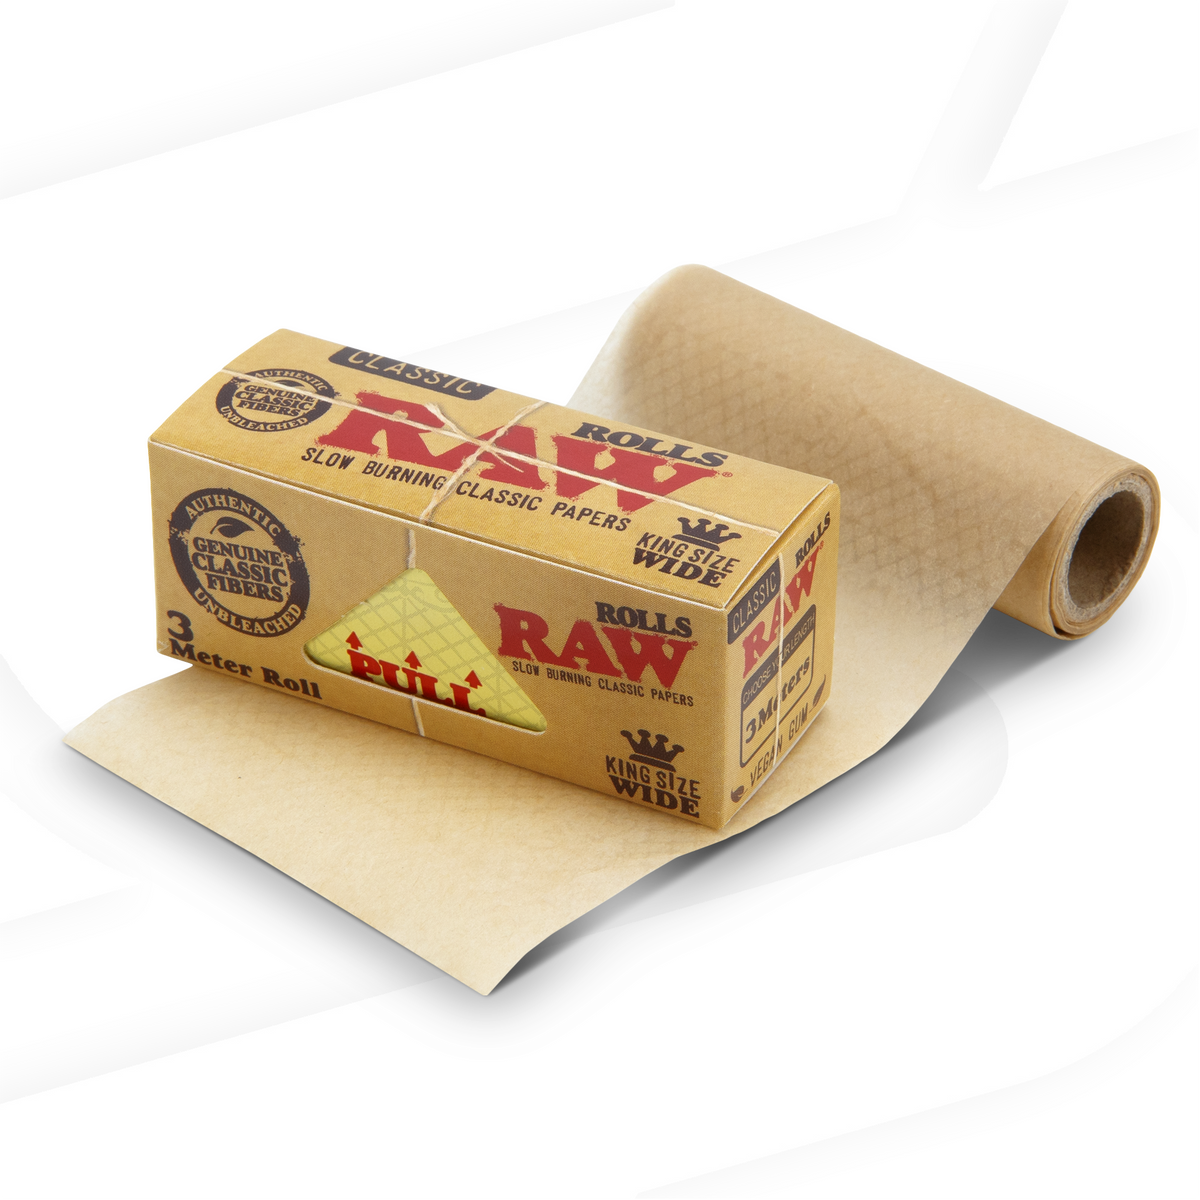 RAW Classic Paper Rolls King Size - 3 Meters Rolling Papers esd-official